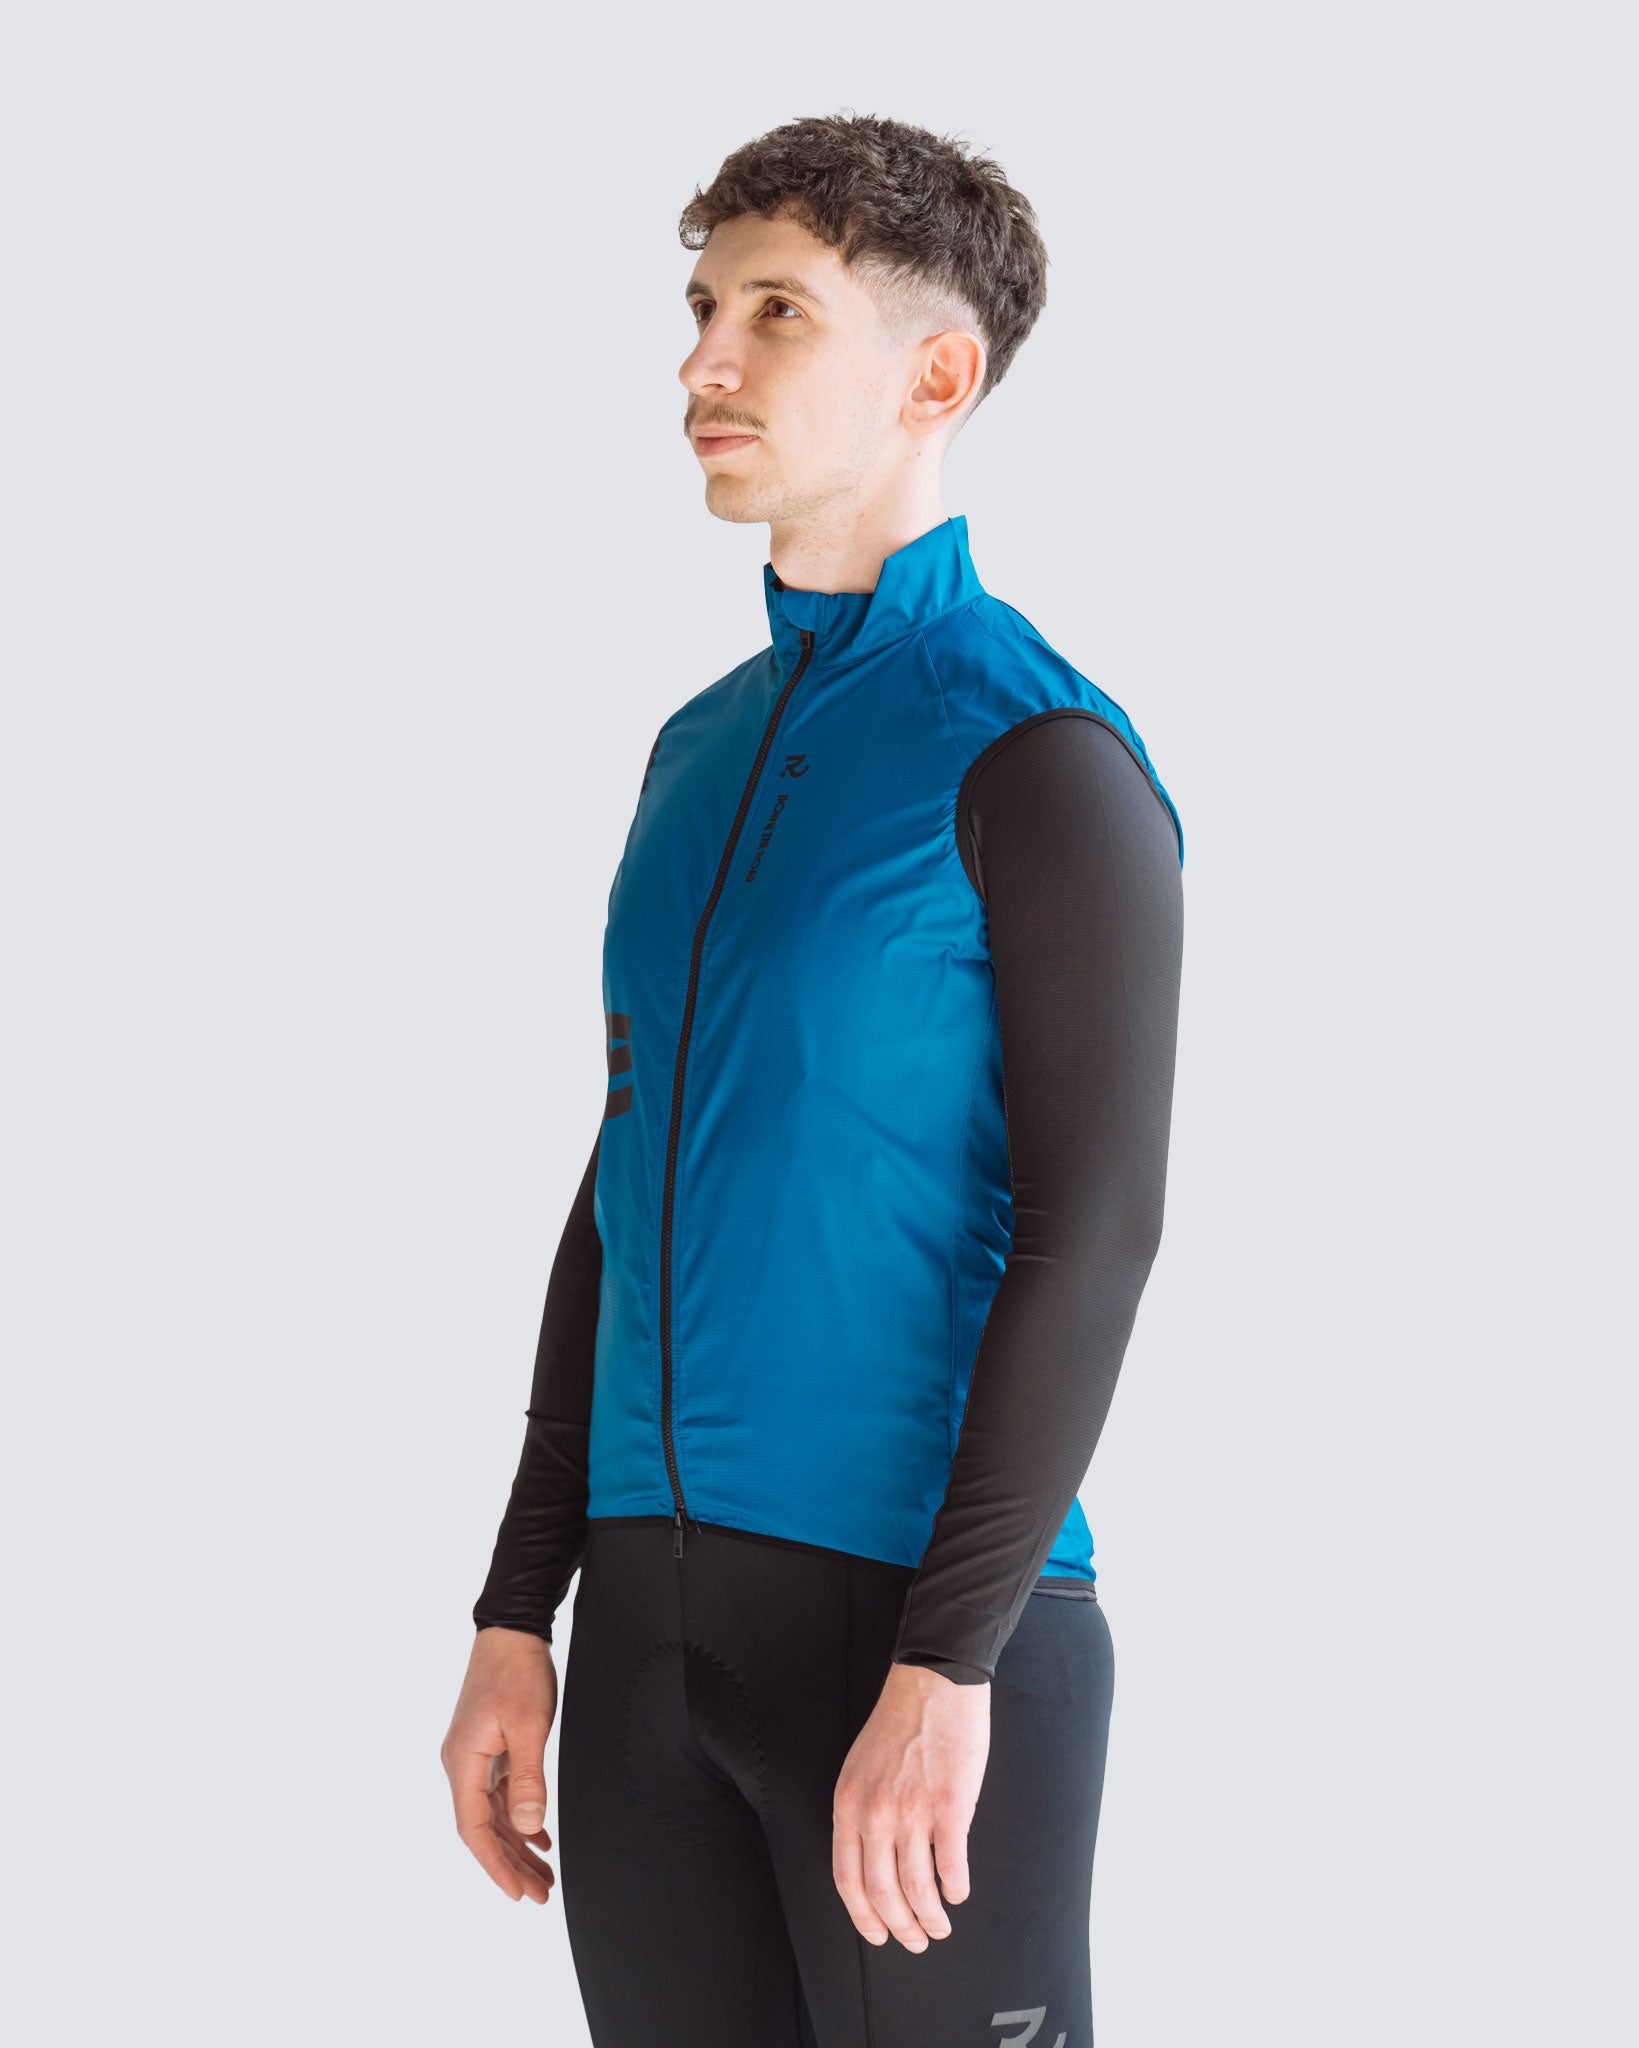 Wavy teal men cycling vest front side view